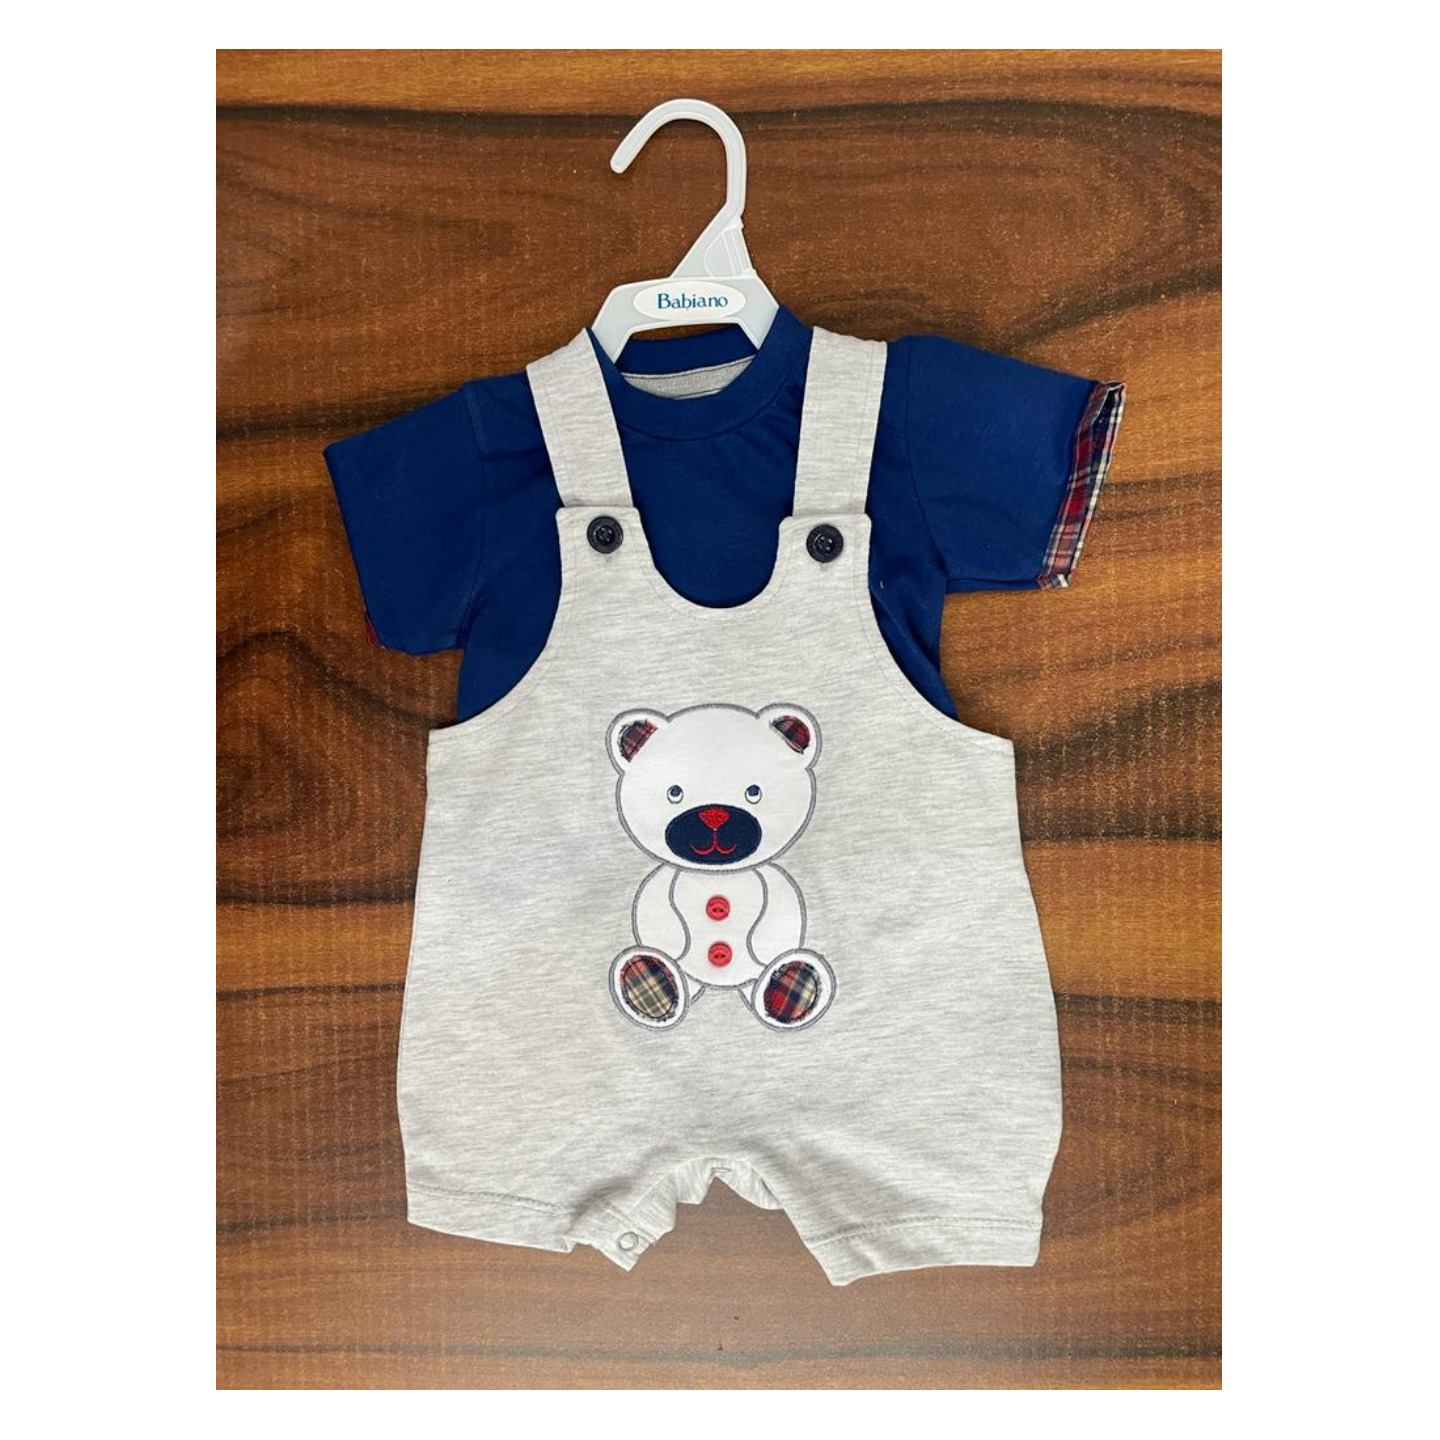 Babiano Bear SUN ROMPER SET Rs 595 Only Made in India NB to 1 Year